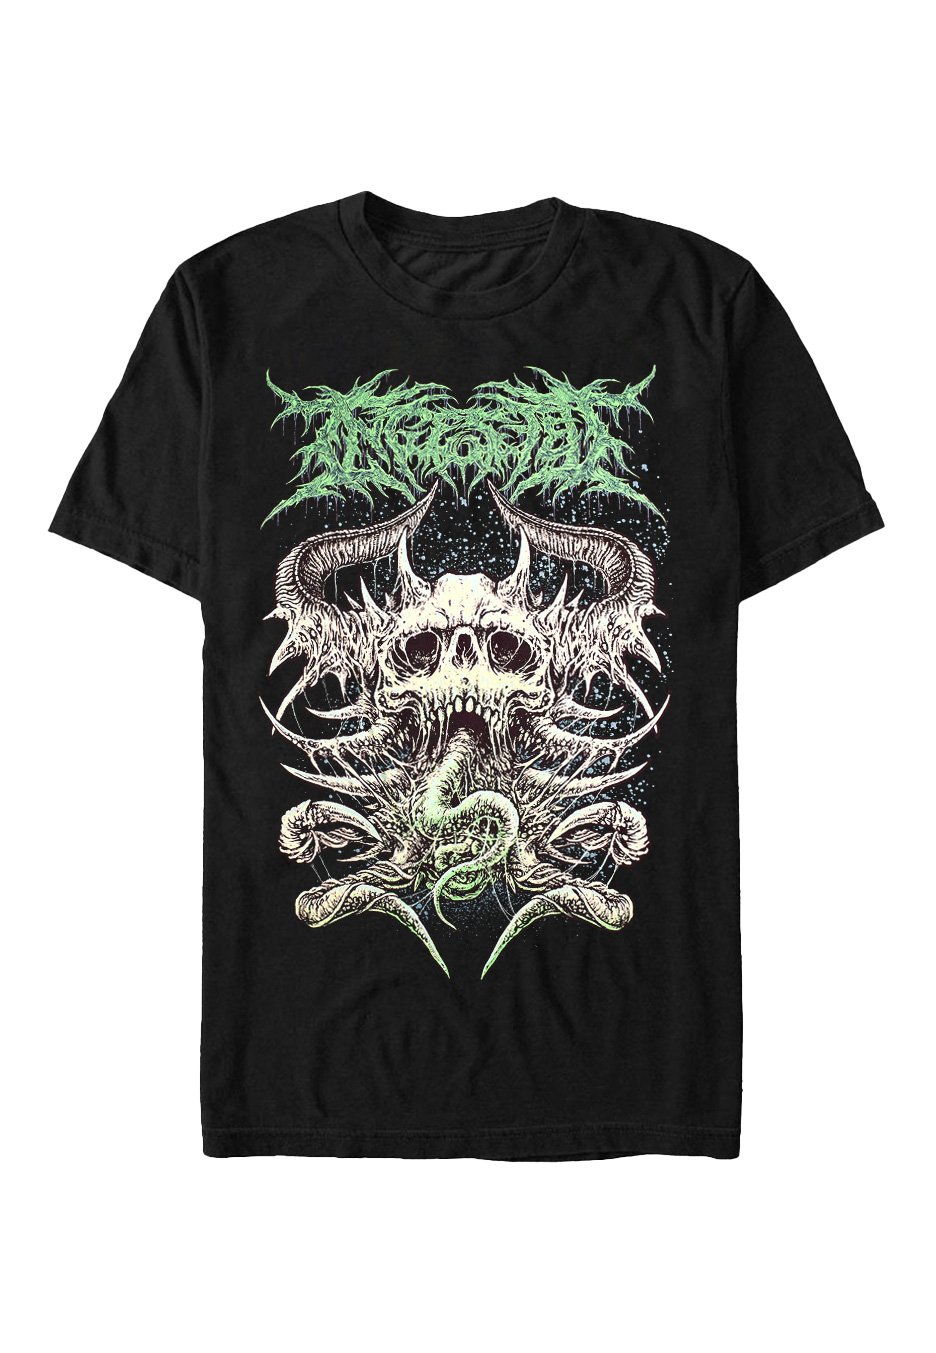 Ingested - Contagion - T-Shirt